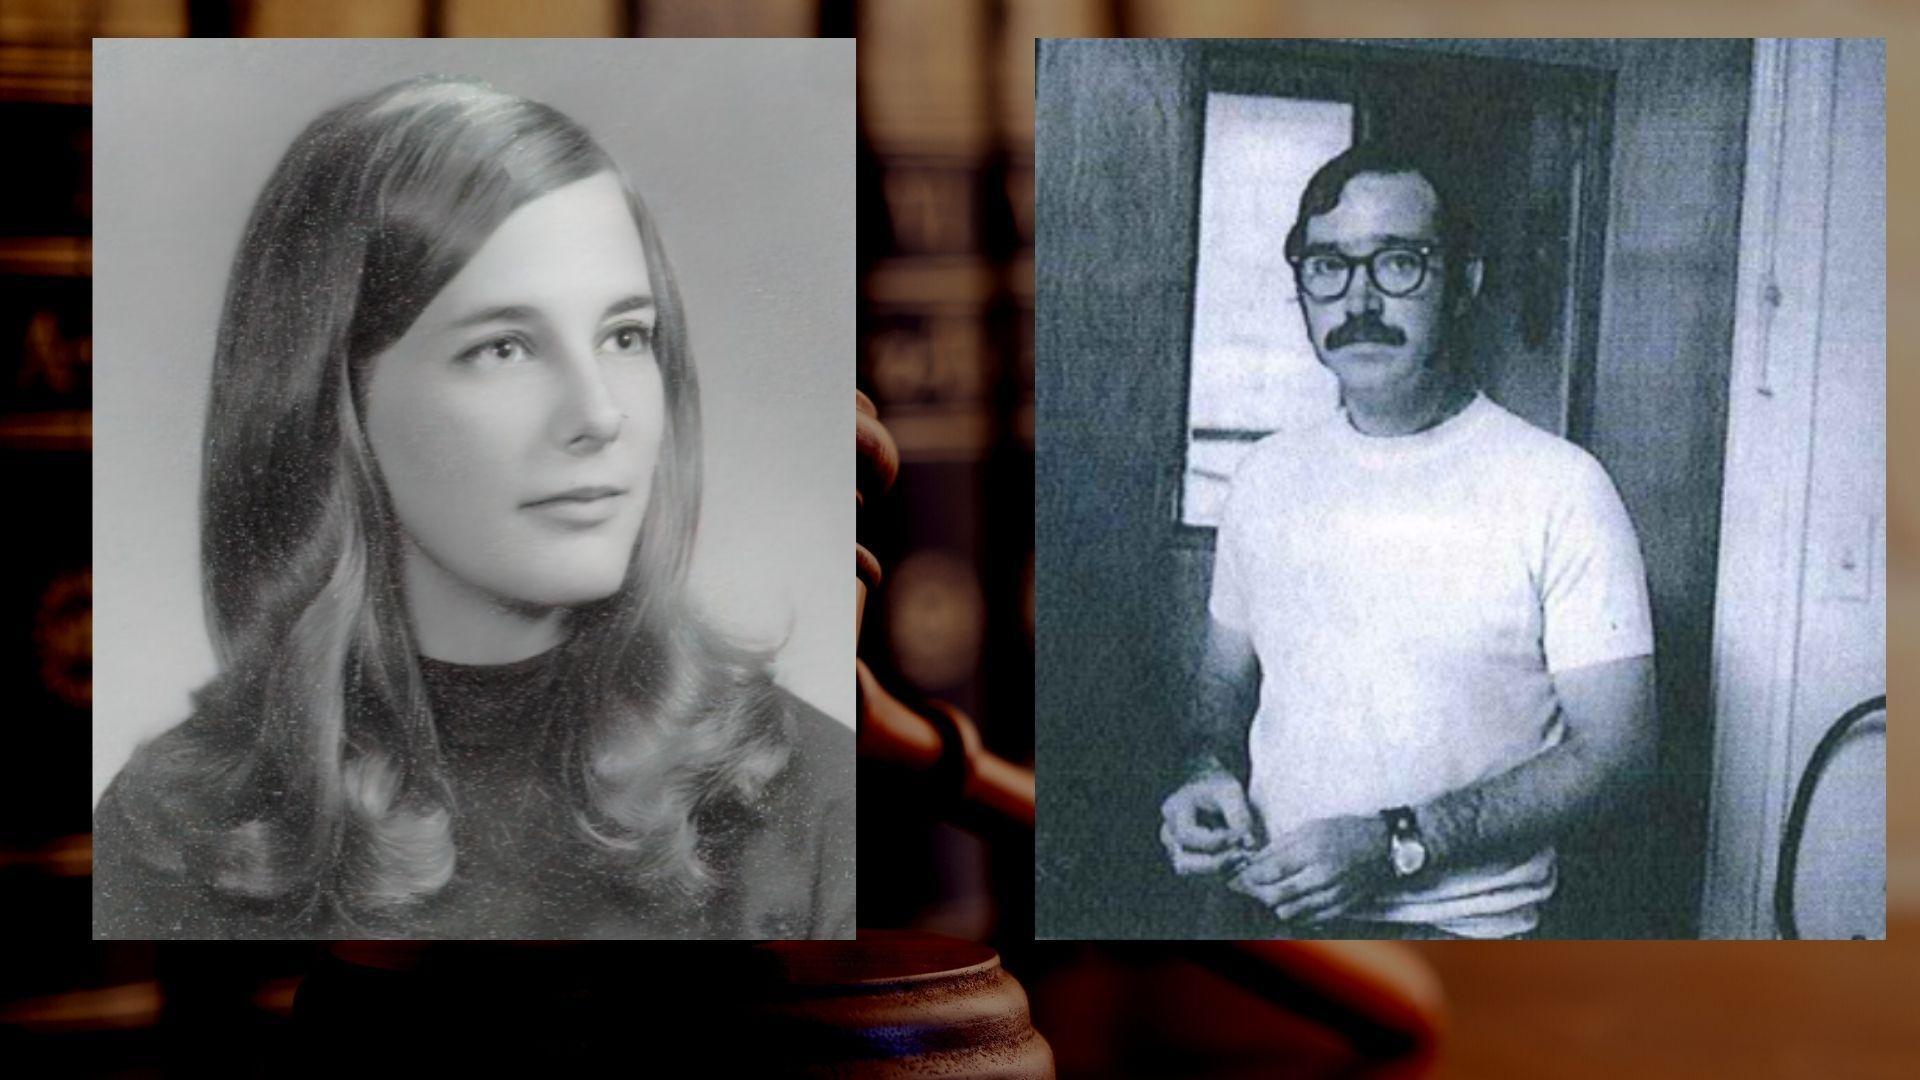 [IMAGE] Council Bluffs police solve 1982 slaying of 32-year-old woman